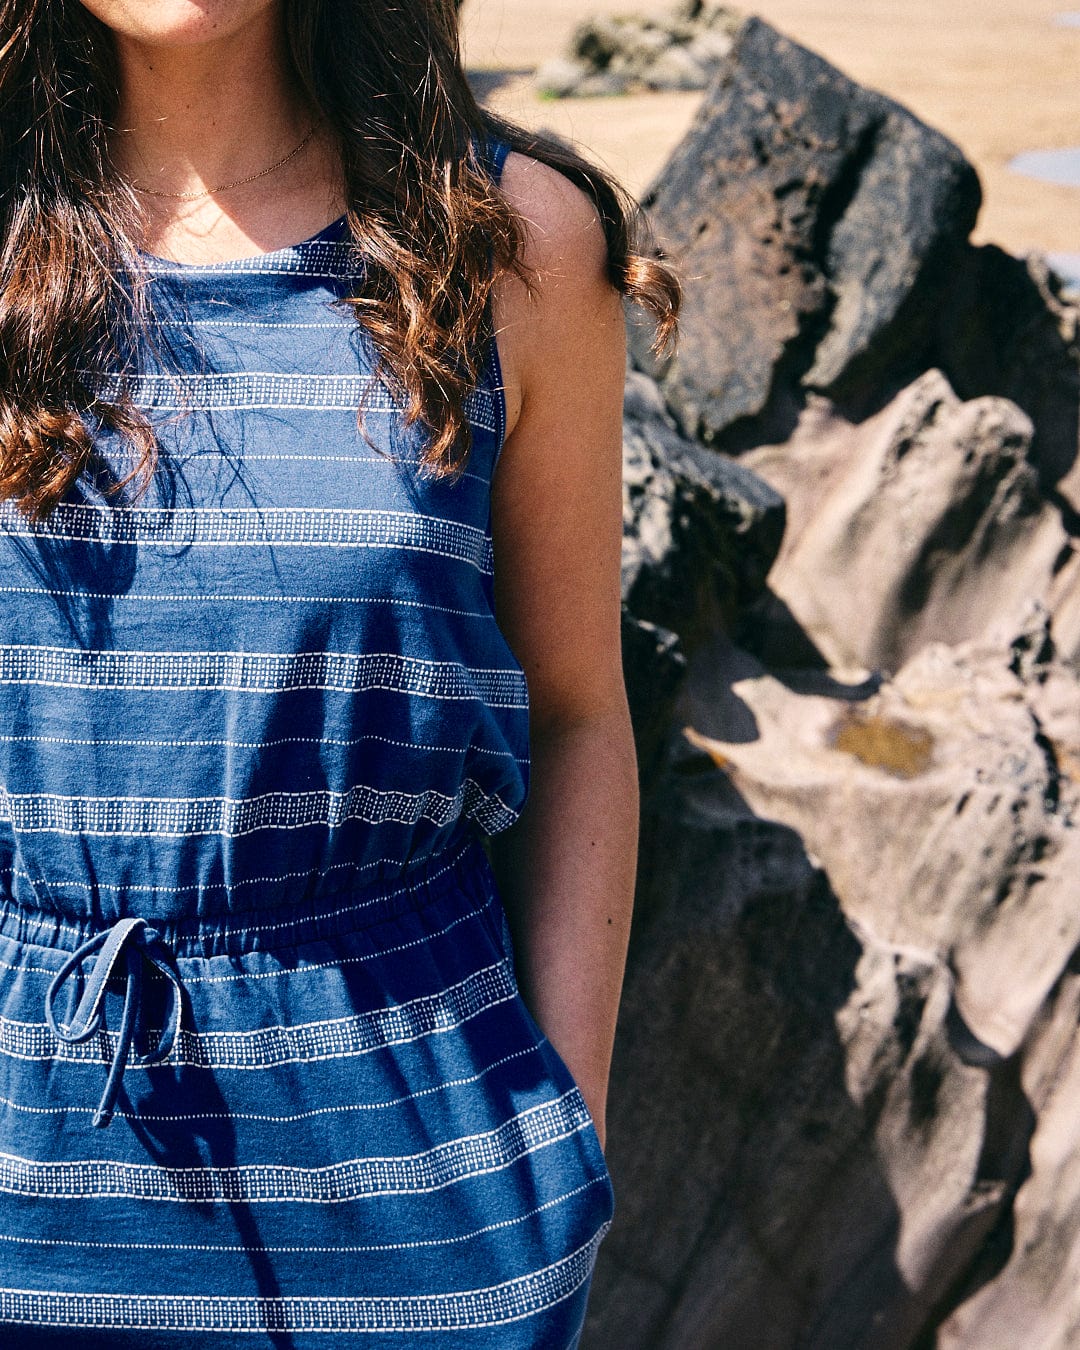 A person in a knee-length, sleeveless Marina Bauhaus - Womens Dress - Blue by Saltrock stands near a large rock formation. Their face is not visible.